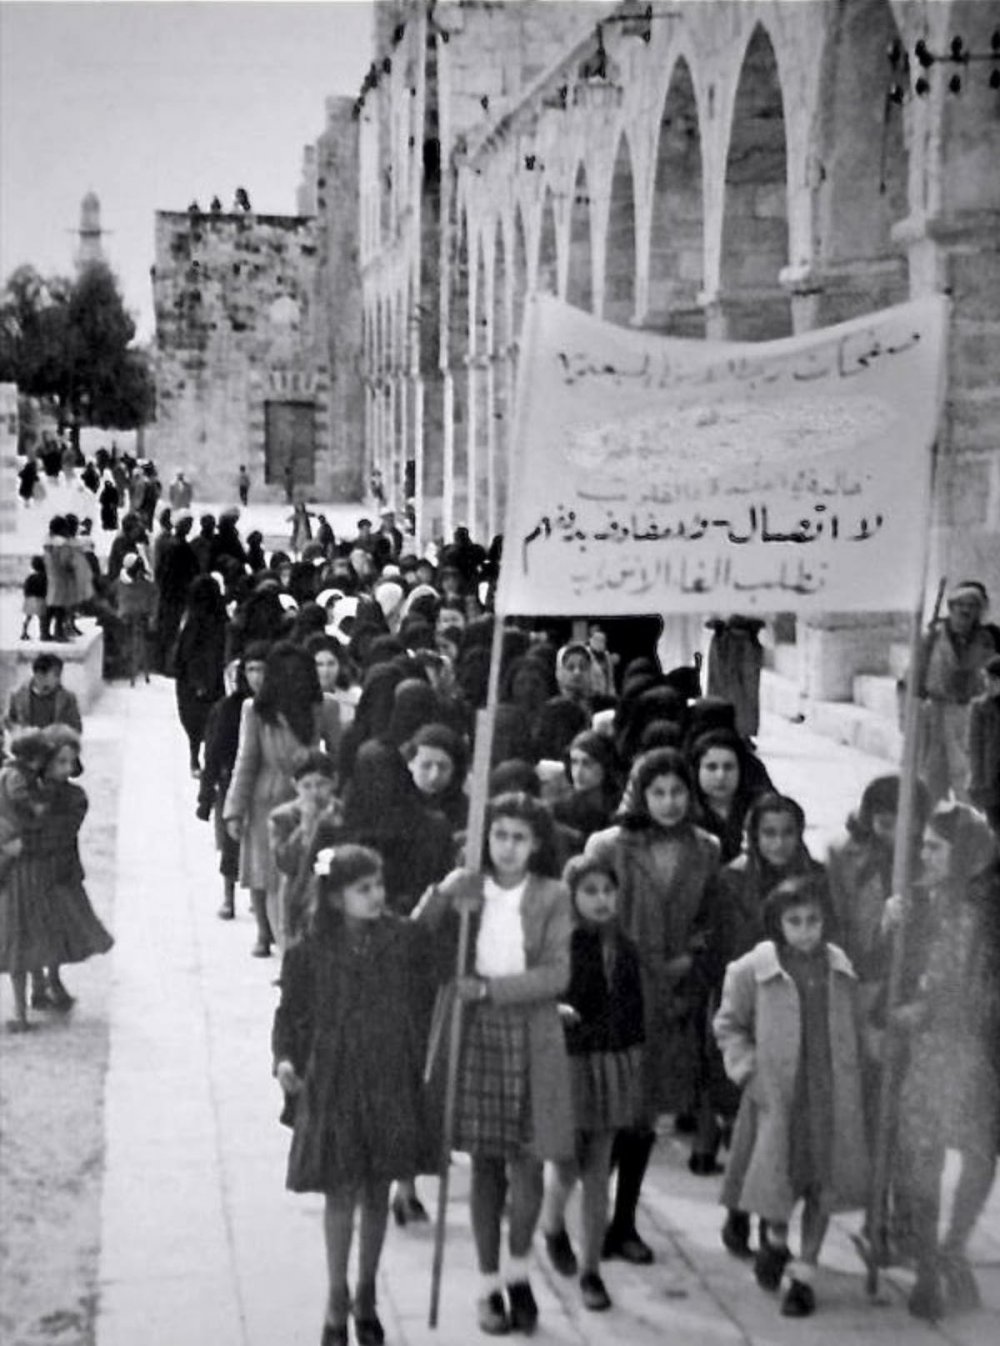 Schoolgirls in Jerusalem led by Zulaykha al-Shihabi hold a protest against the British Mandate.